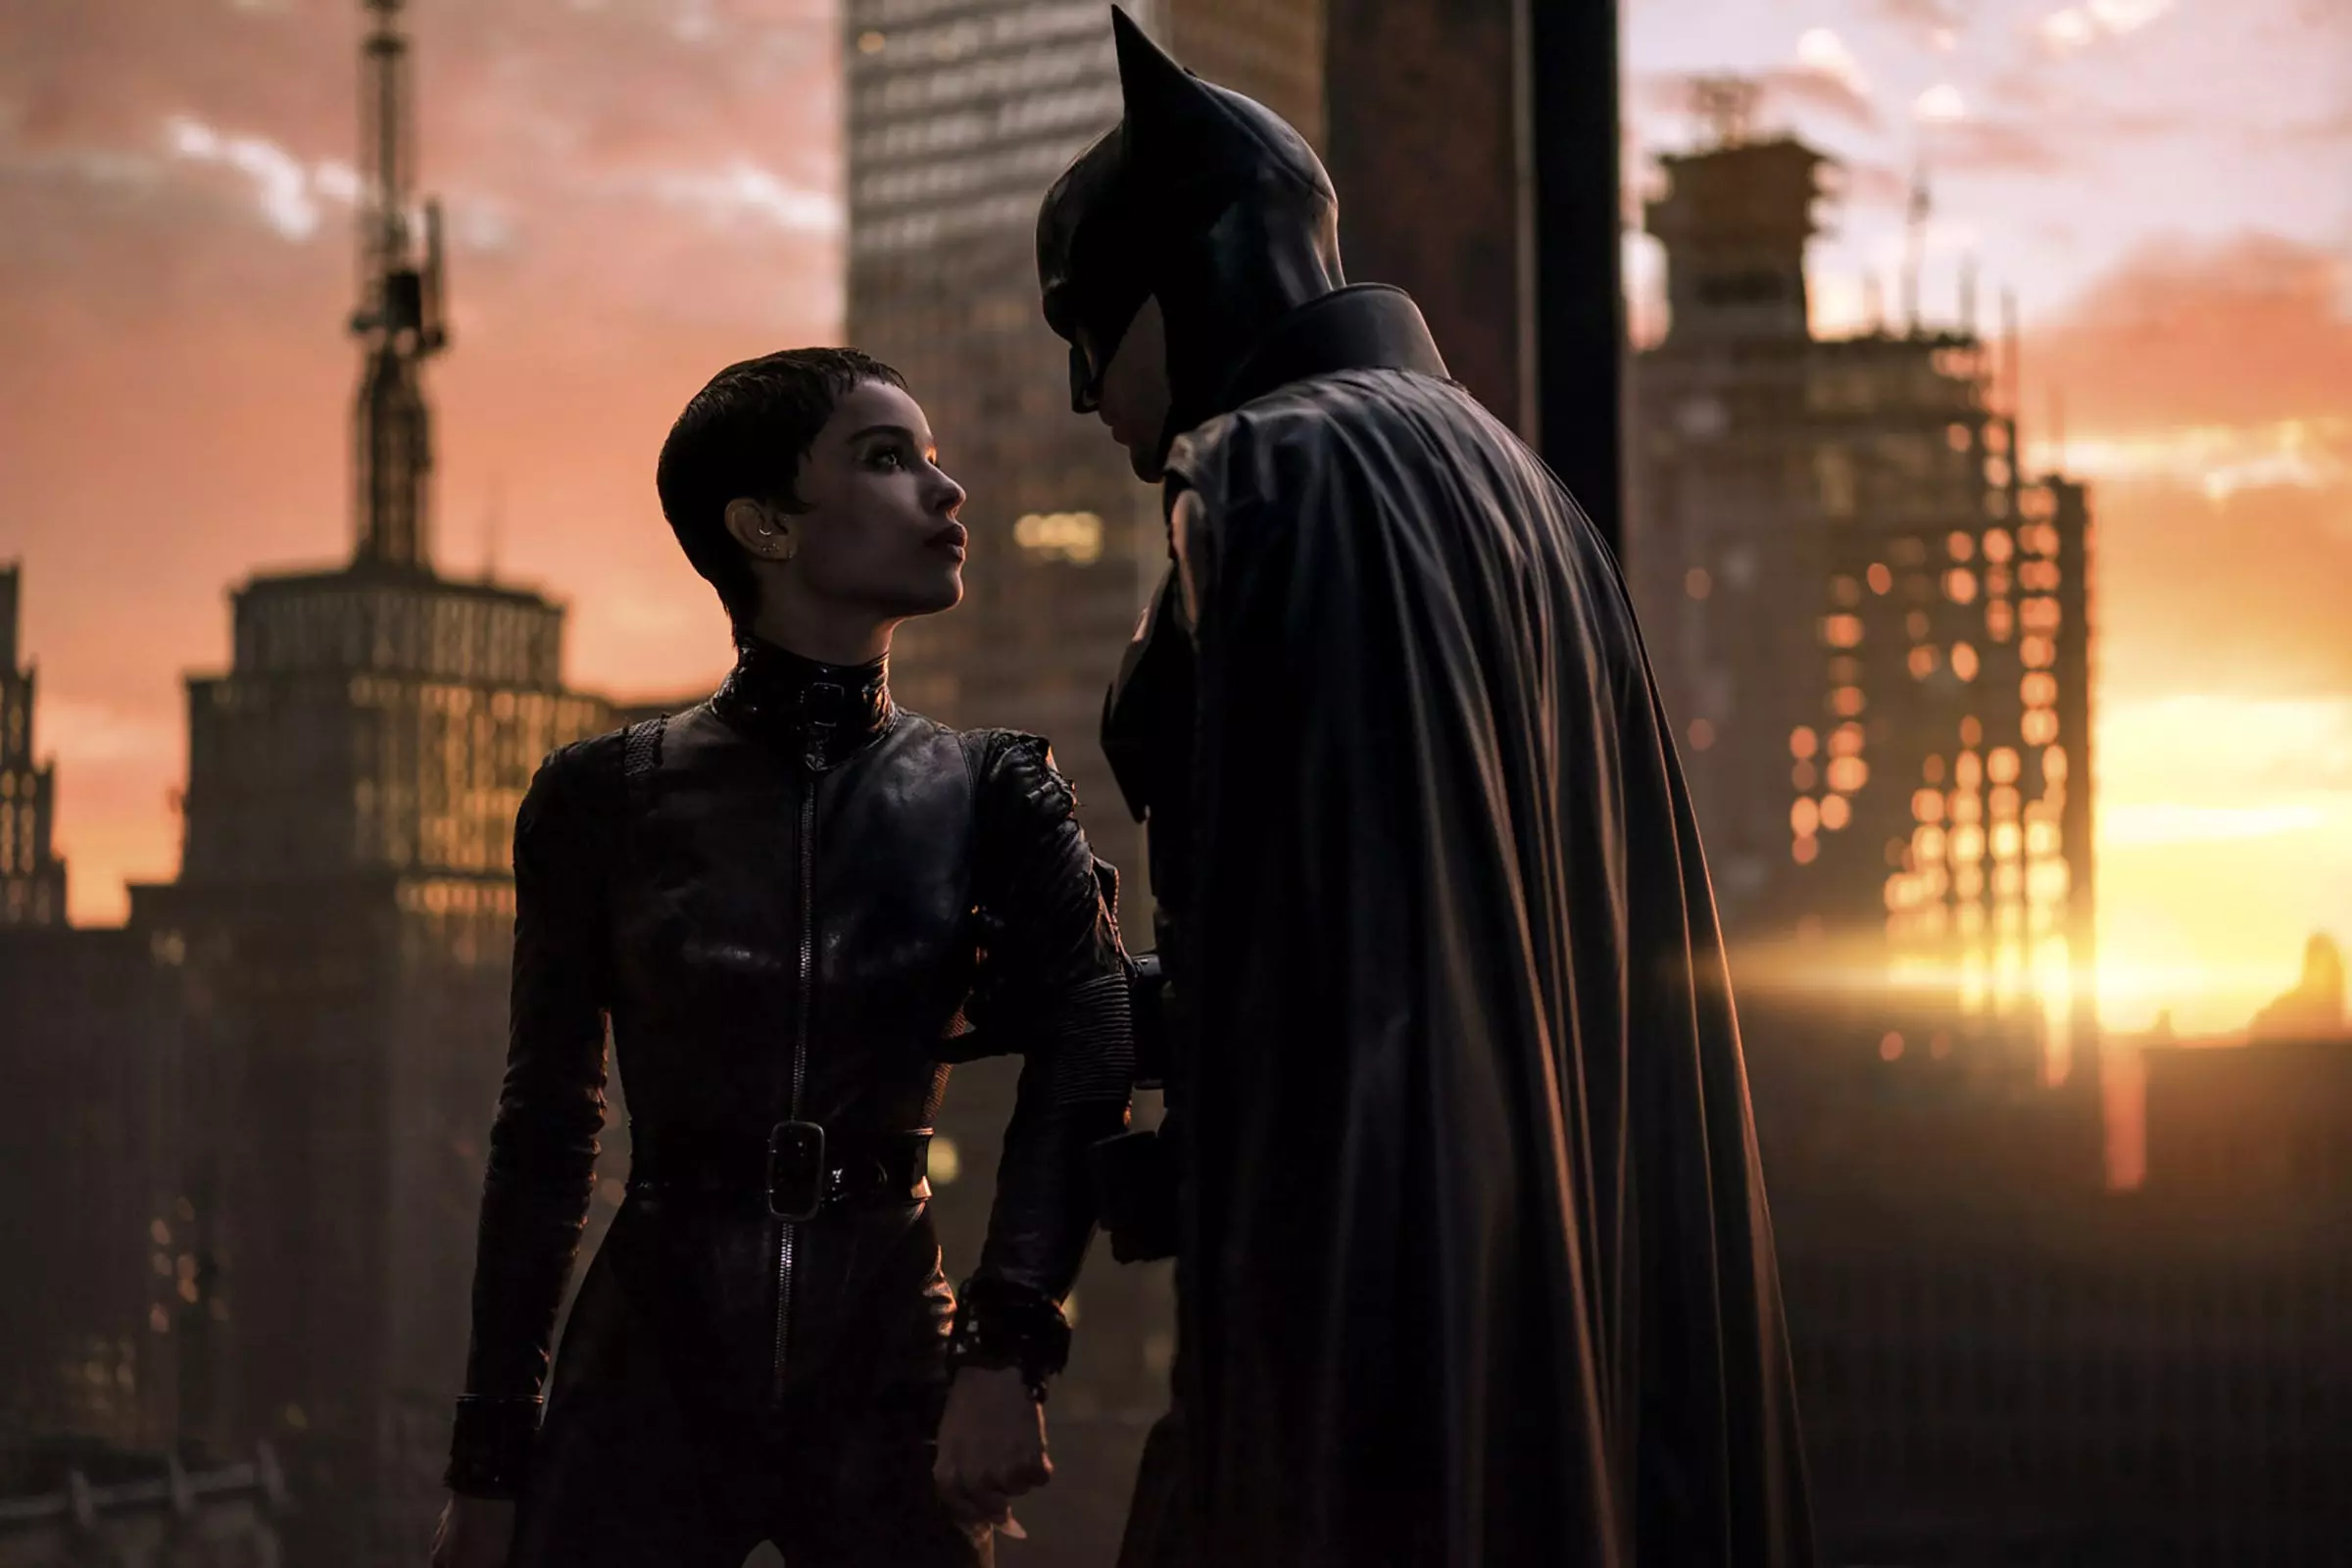 Catwoman (Zoë Kravitz) and Batman (Robert Pattinson) partner up as allies (and love interests) when a serial killer is loose in Gotham City in director Matt Reeves